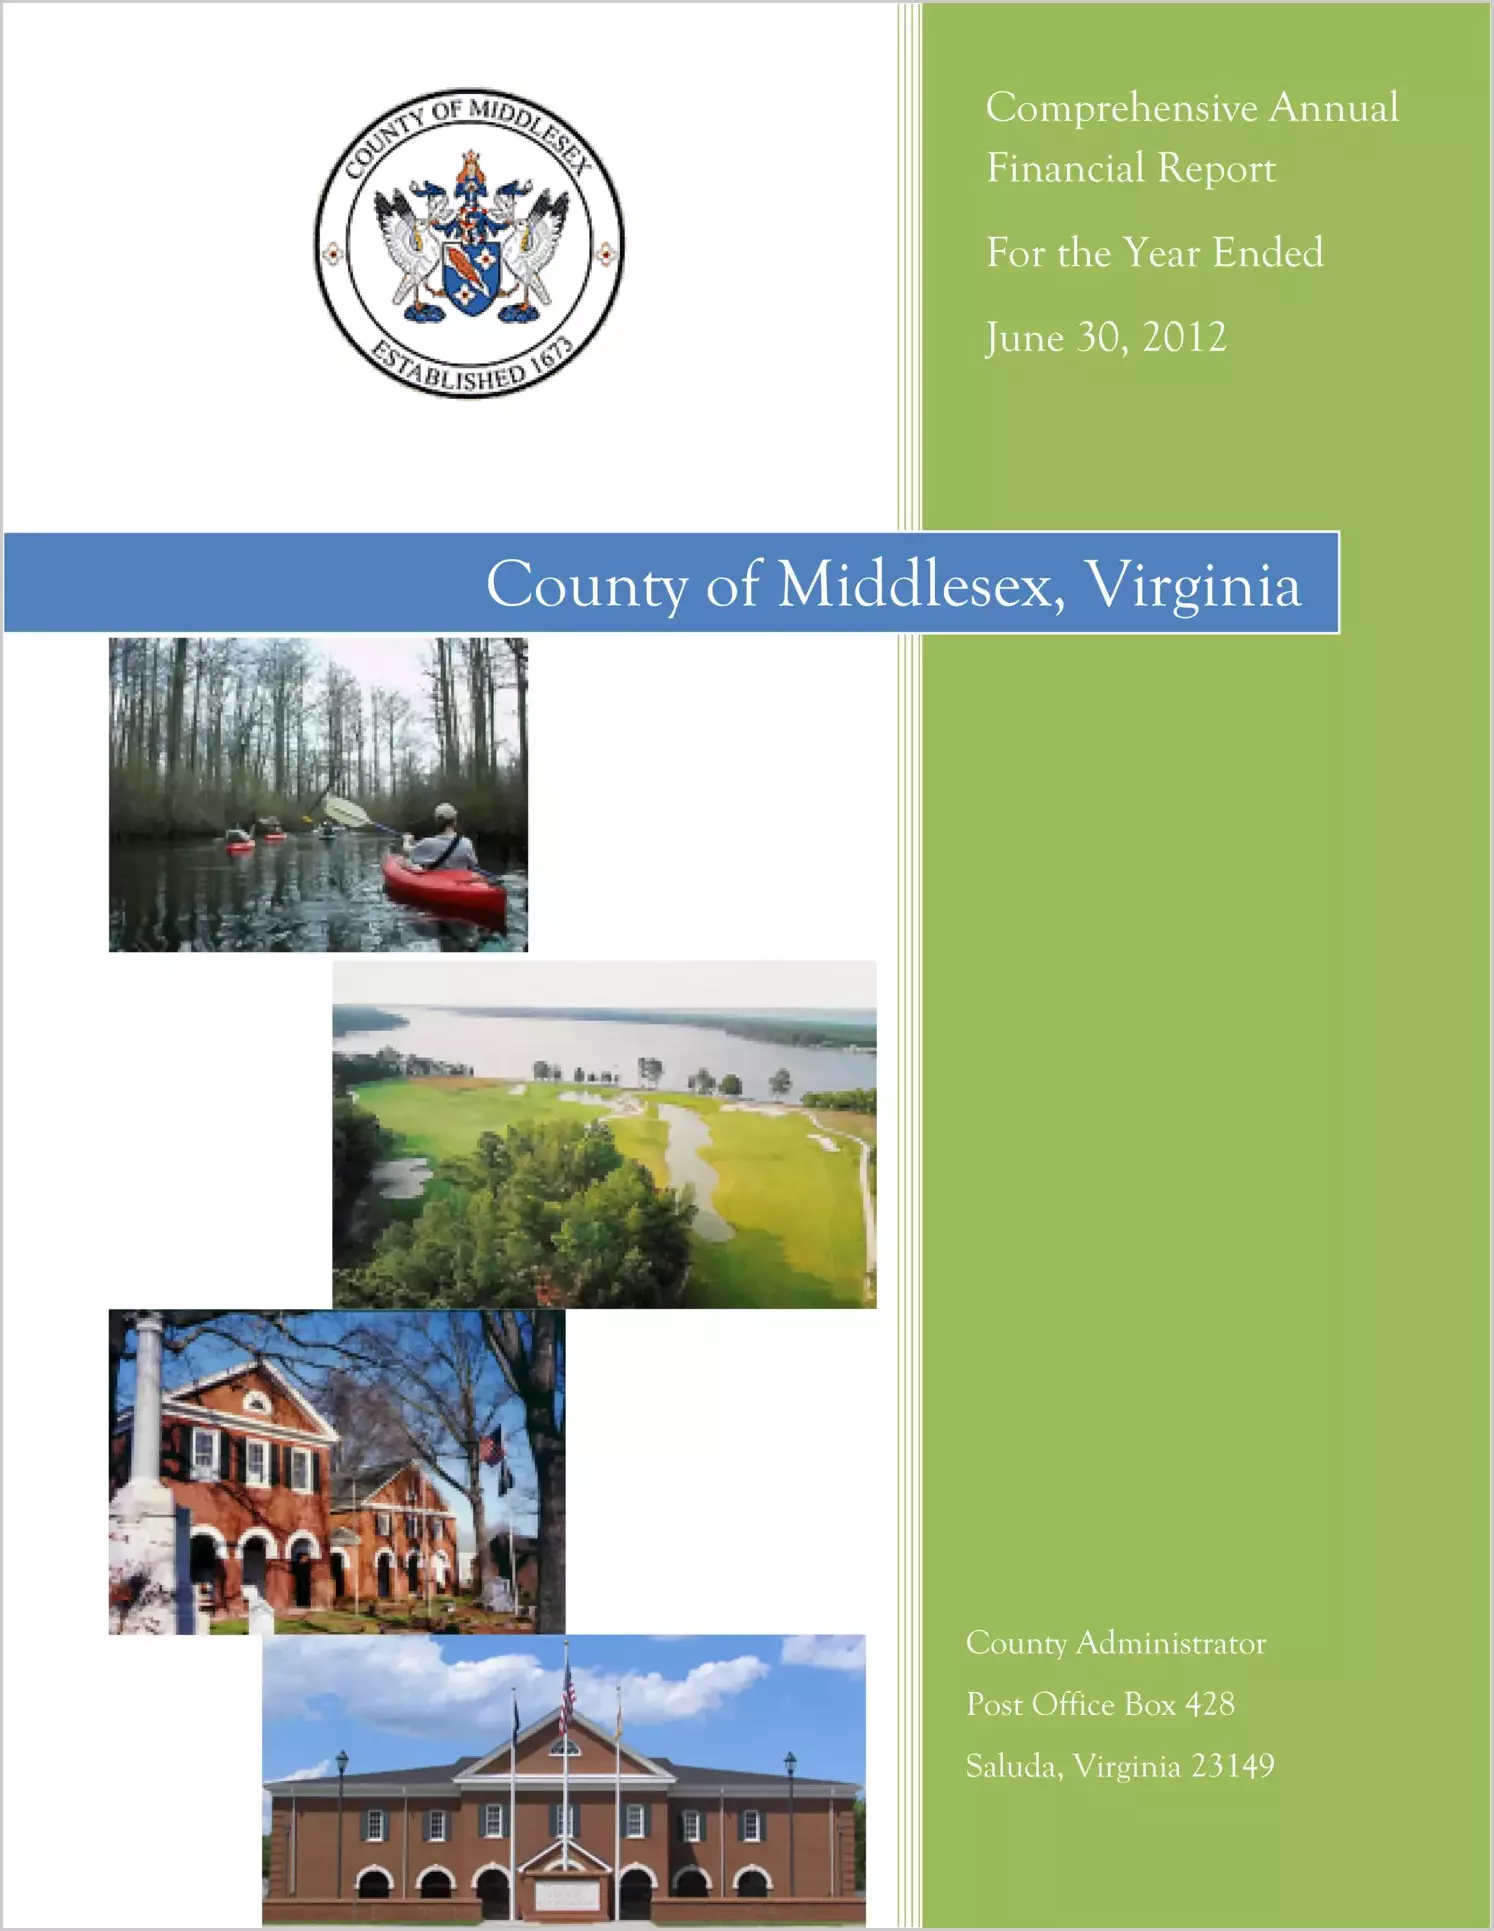 2012 Annual Financial Report for County of Middlesex